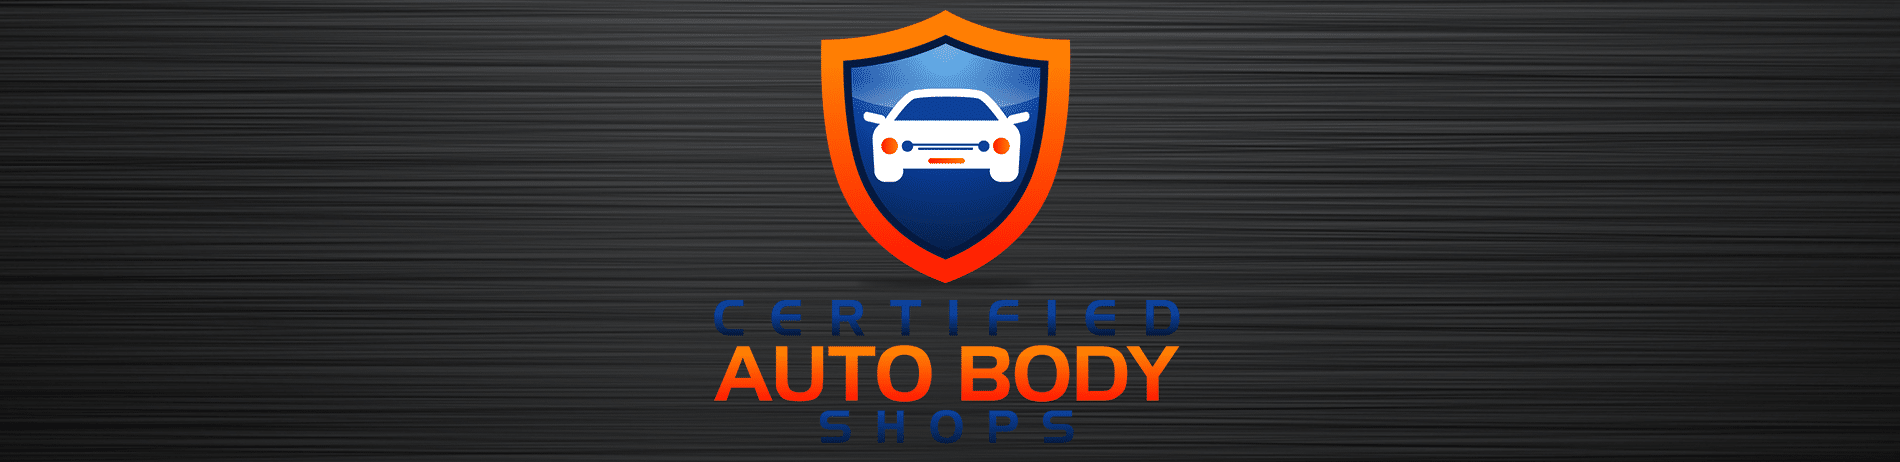 Ford Certified Auto Body Shop